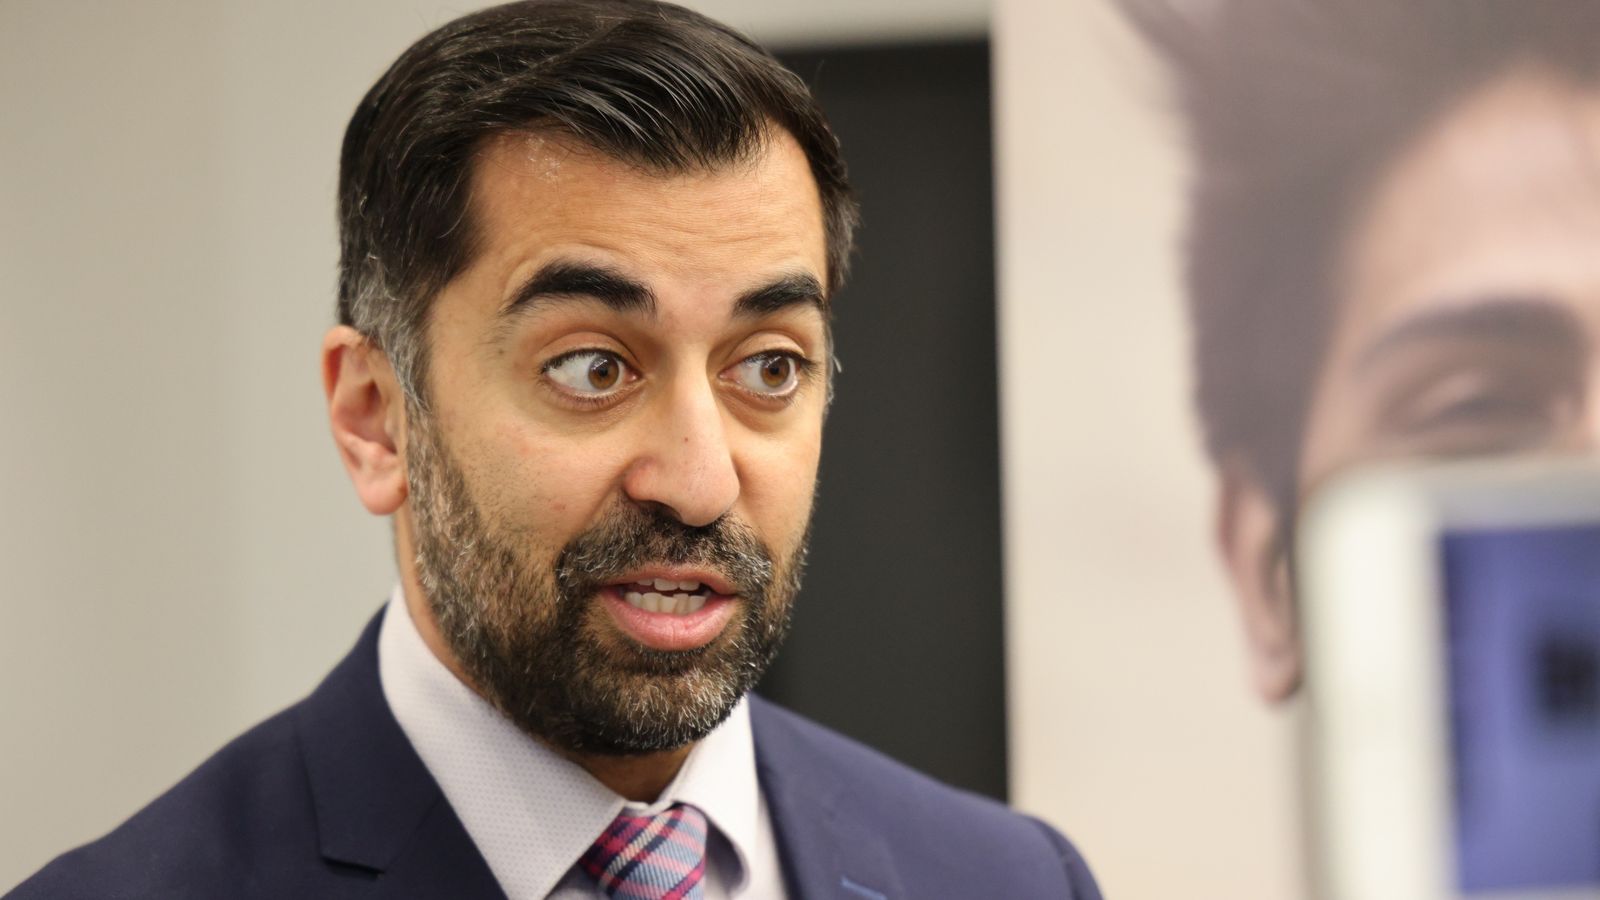 First Minister Humza Yousaf says governance of SNP 'was not as it should be'